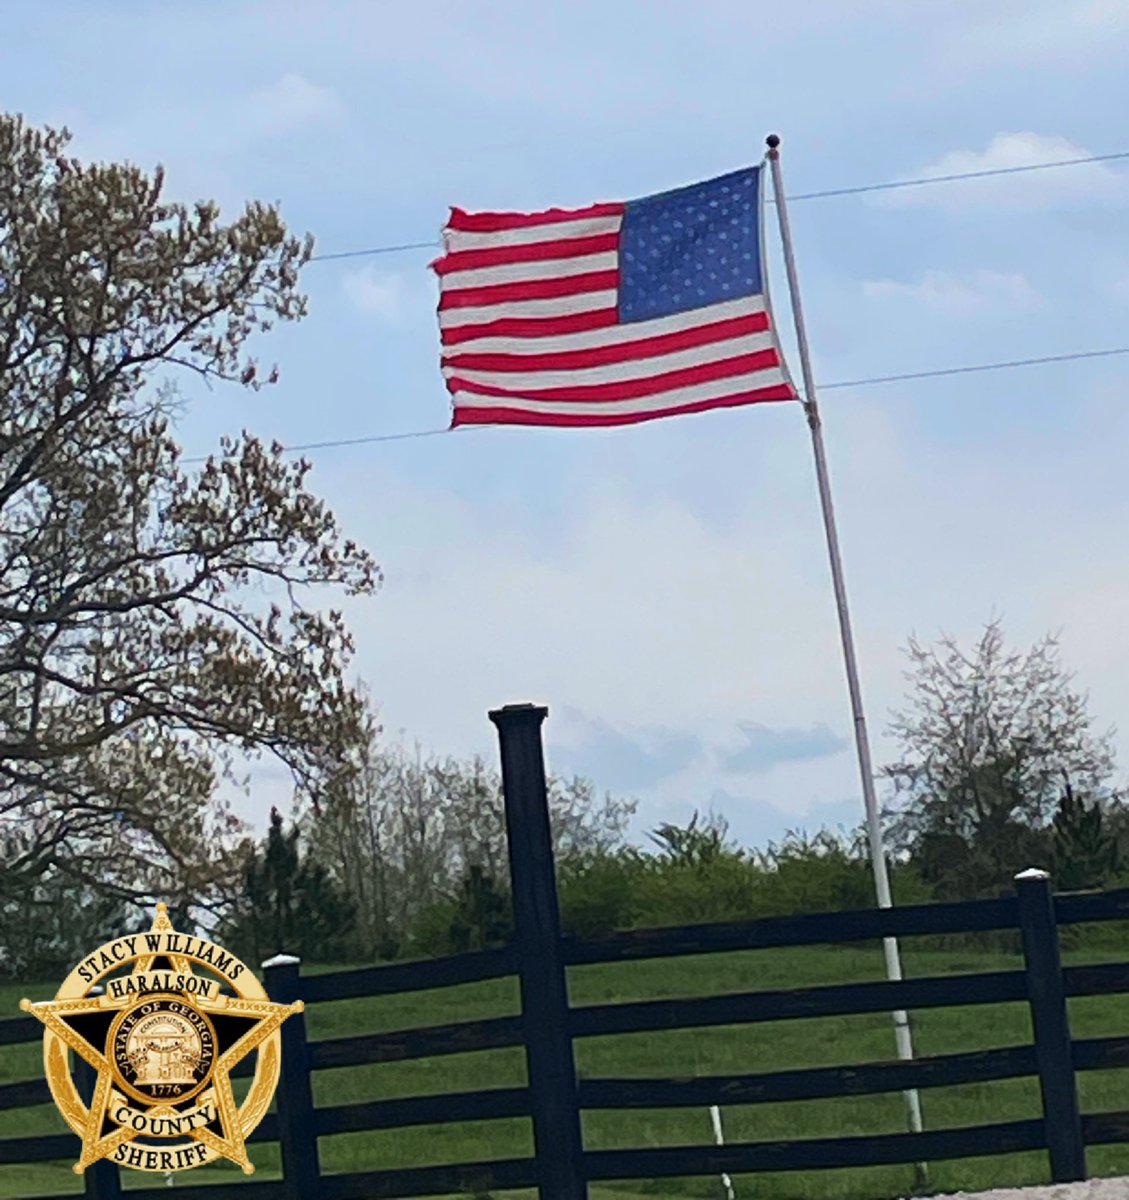 Good Friday Mornin’ folks, we hope y’all have a fantastic day!

“Solitude is different from loneliness, and it doesn't have to be a lonely kind of thing.” ― Fred Rogers

Photo credit: Deputy N Ivey

#HaralsonMornings 
#FlagFriday 
#MisterRogers 
#CallUsIfYouNeedUs